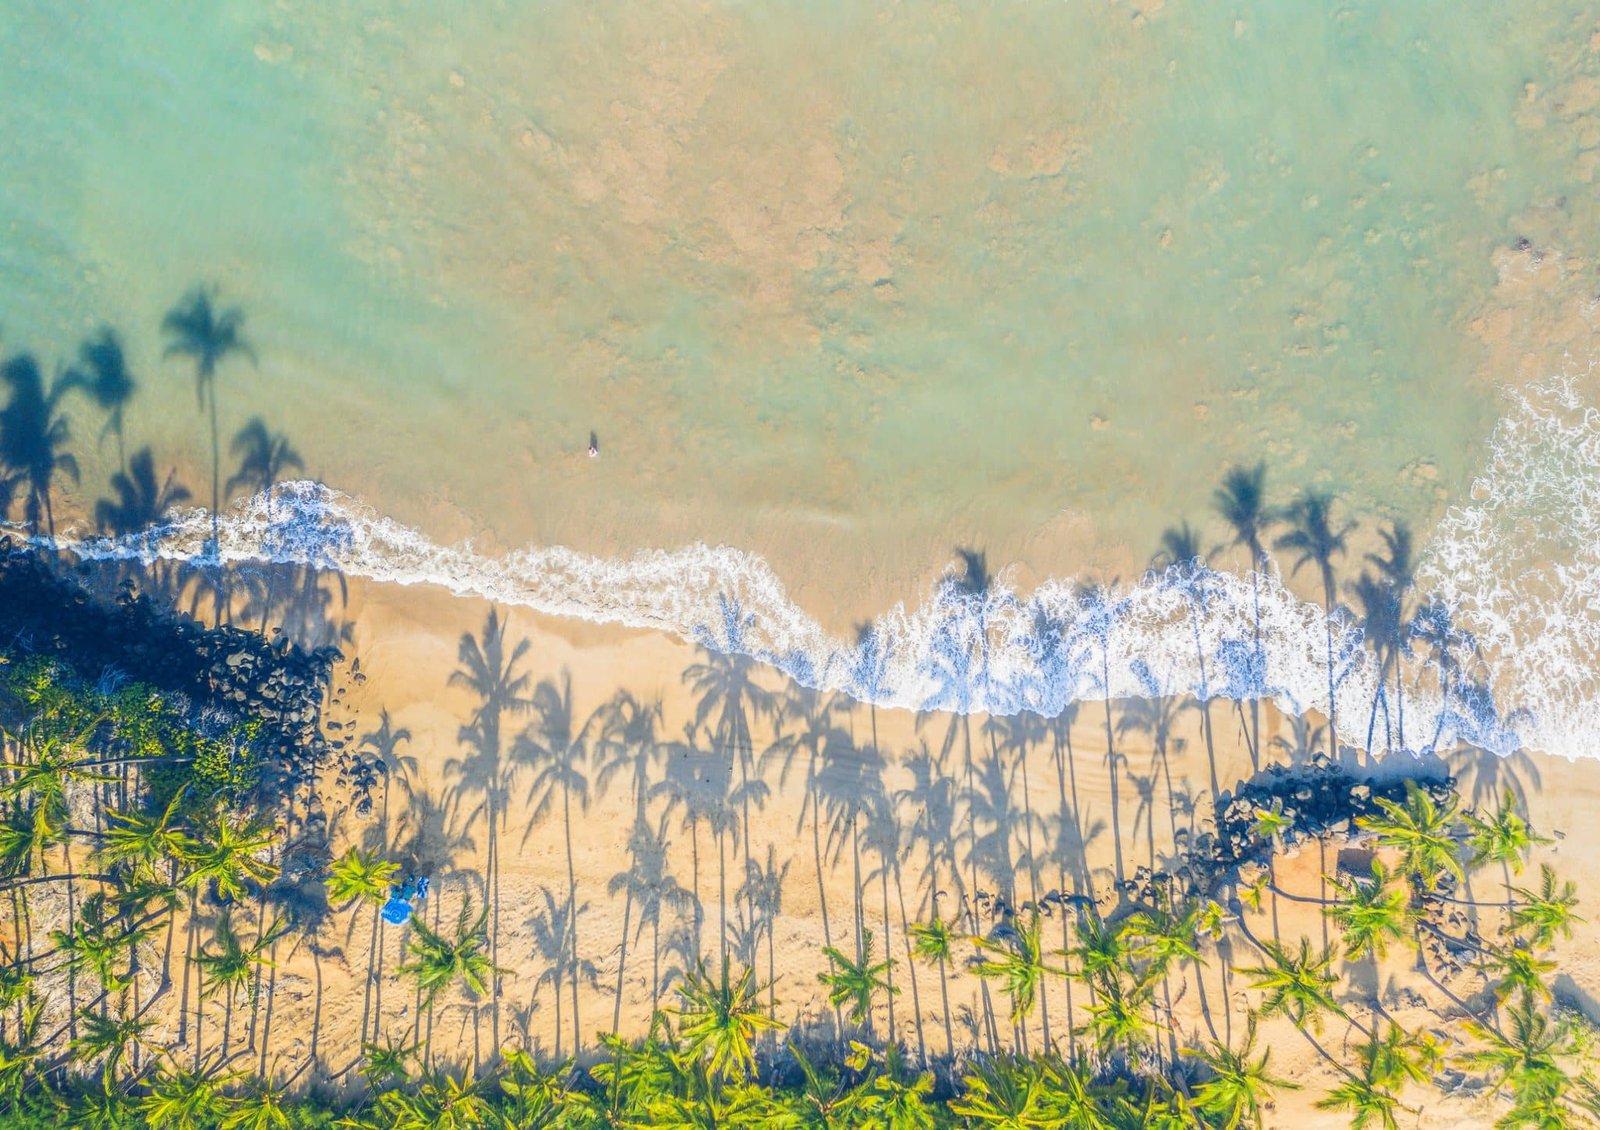 Morning drone view of palms on deserted beach with gentle waves on Maui, Hawaii, USA.